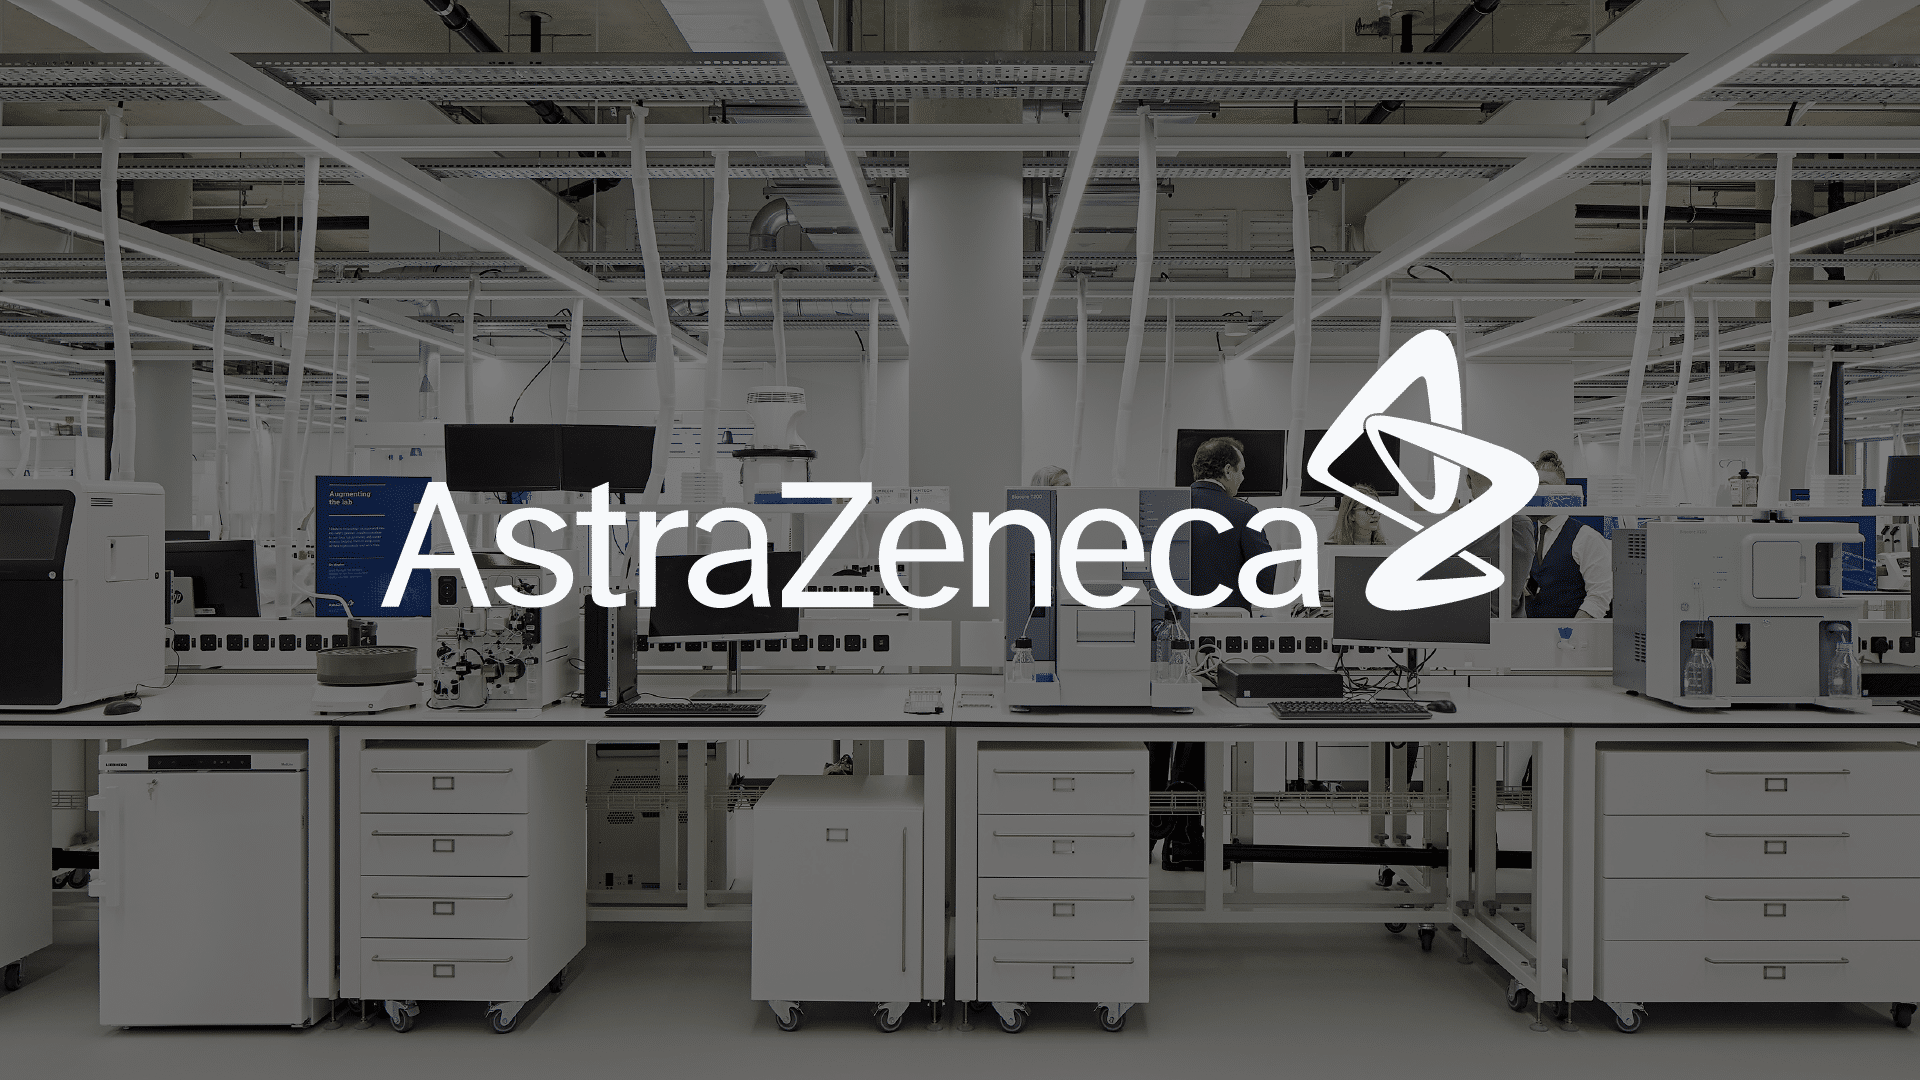 AstraZeneca case study header image, showing one of their labs and their logo